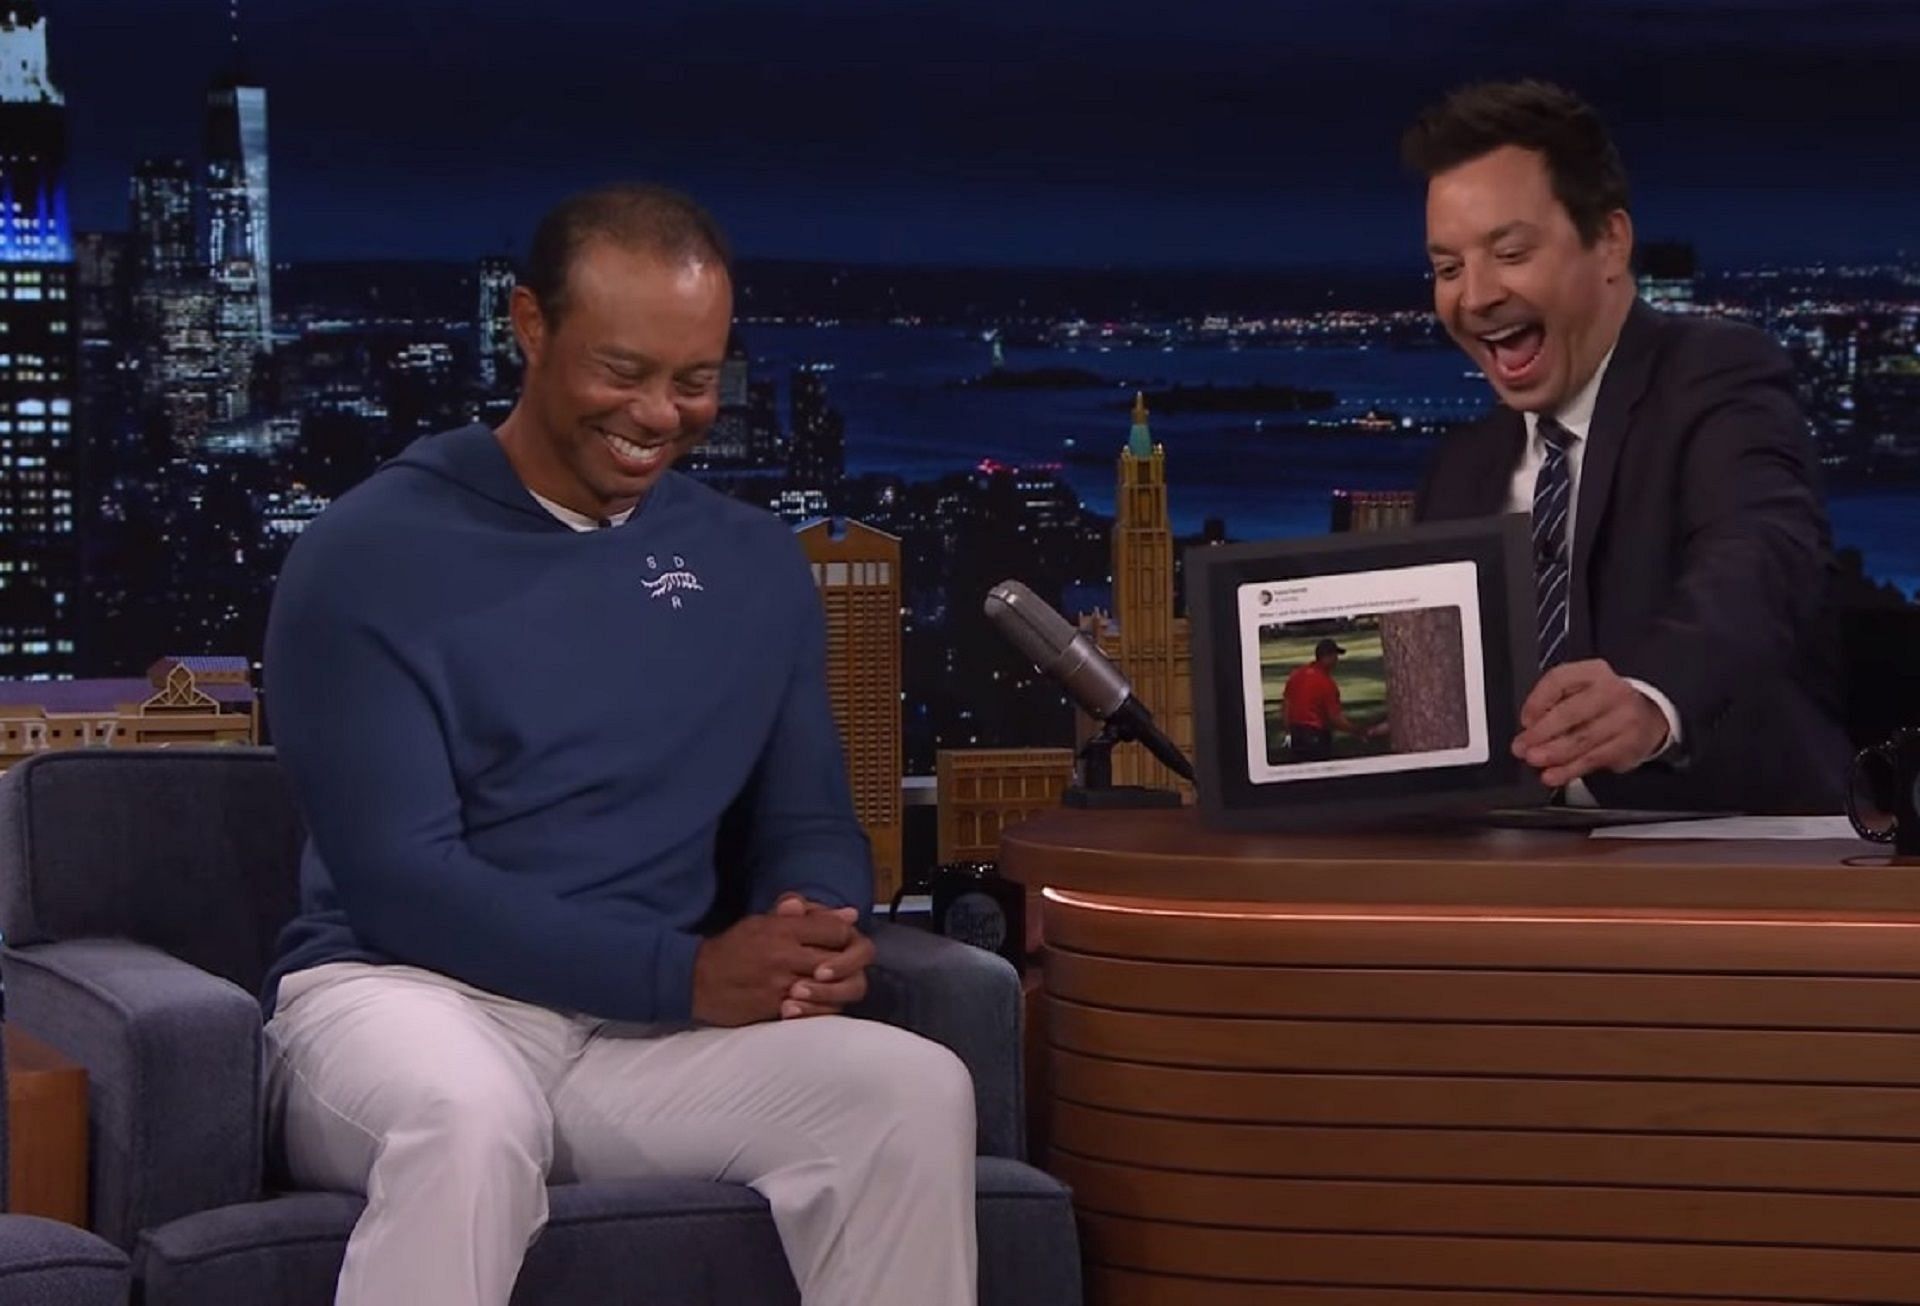 Tiger Woods was recently present at the Tonight Show Starring Jimmy Fallon